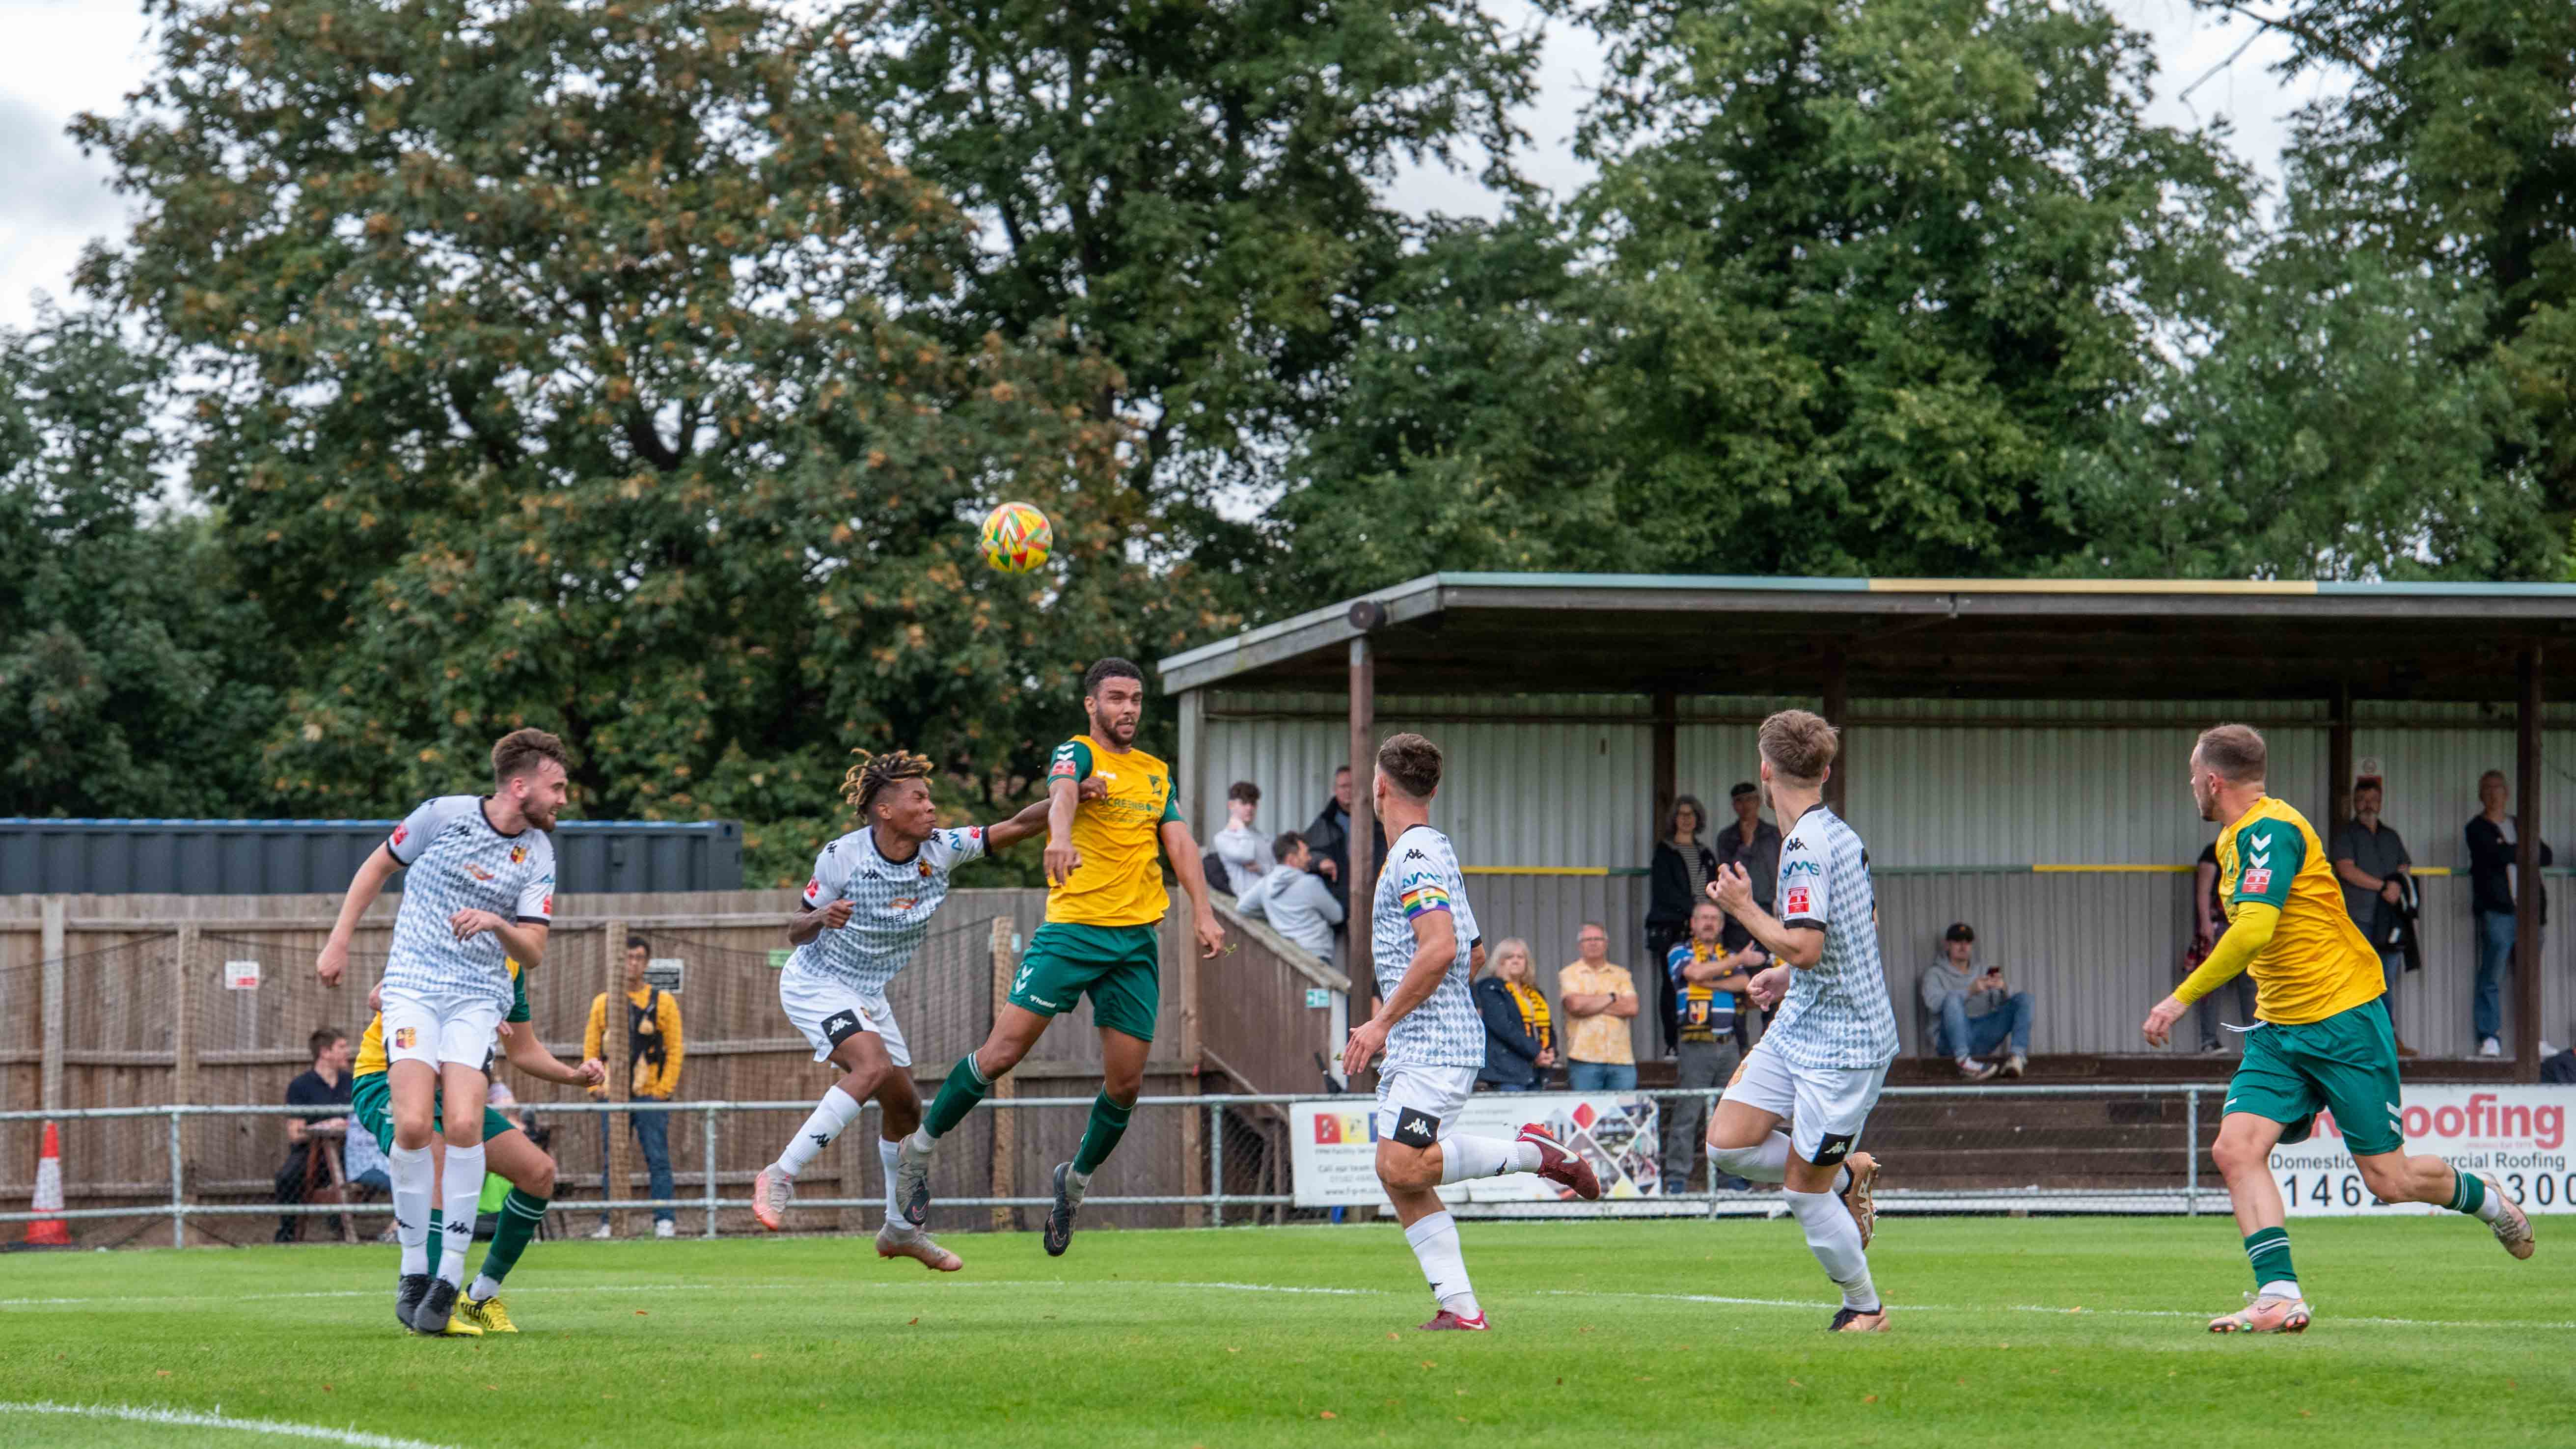 Hitchin Town 2-0 Alvechurch: Canaries soar to clinch heartening victory on opening day at Top Field. CREDIT: PETER ELSE 